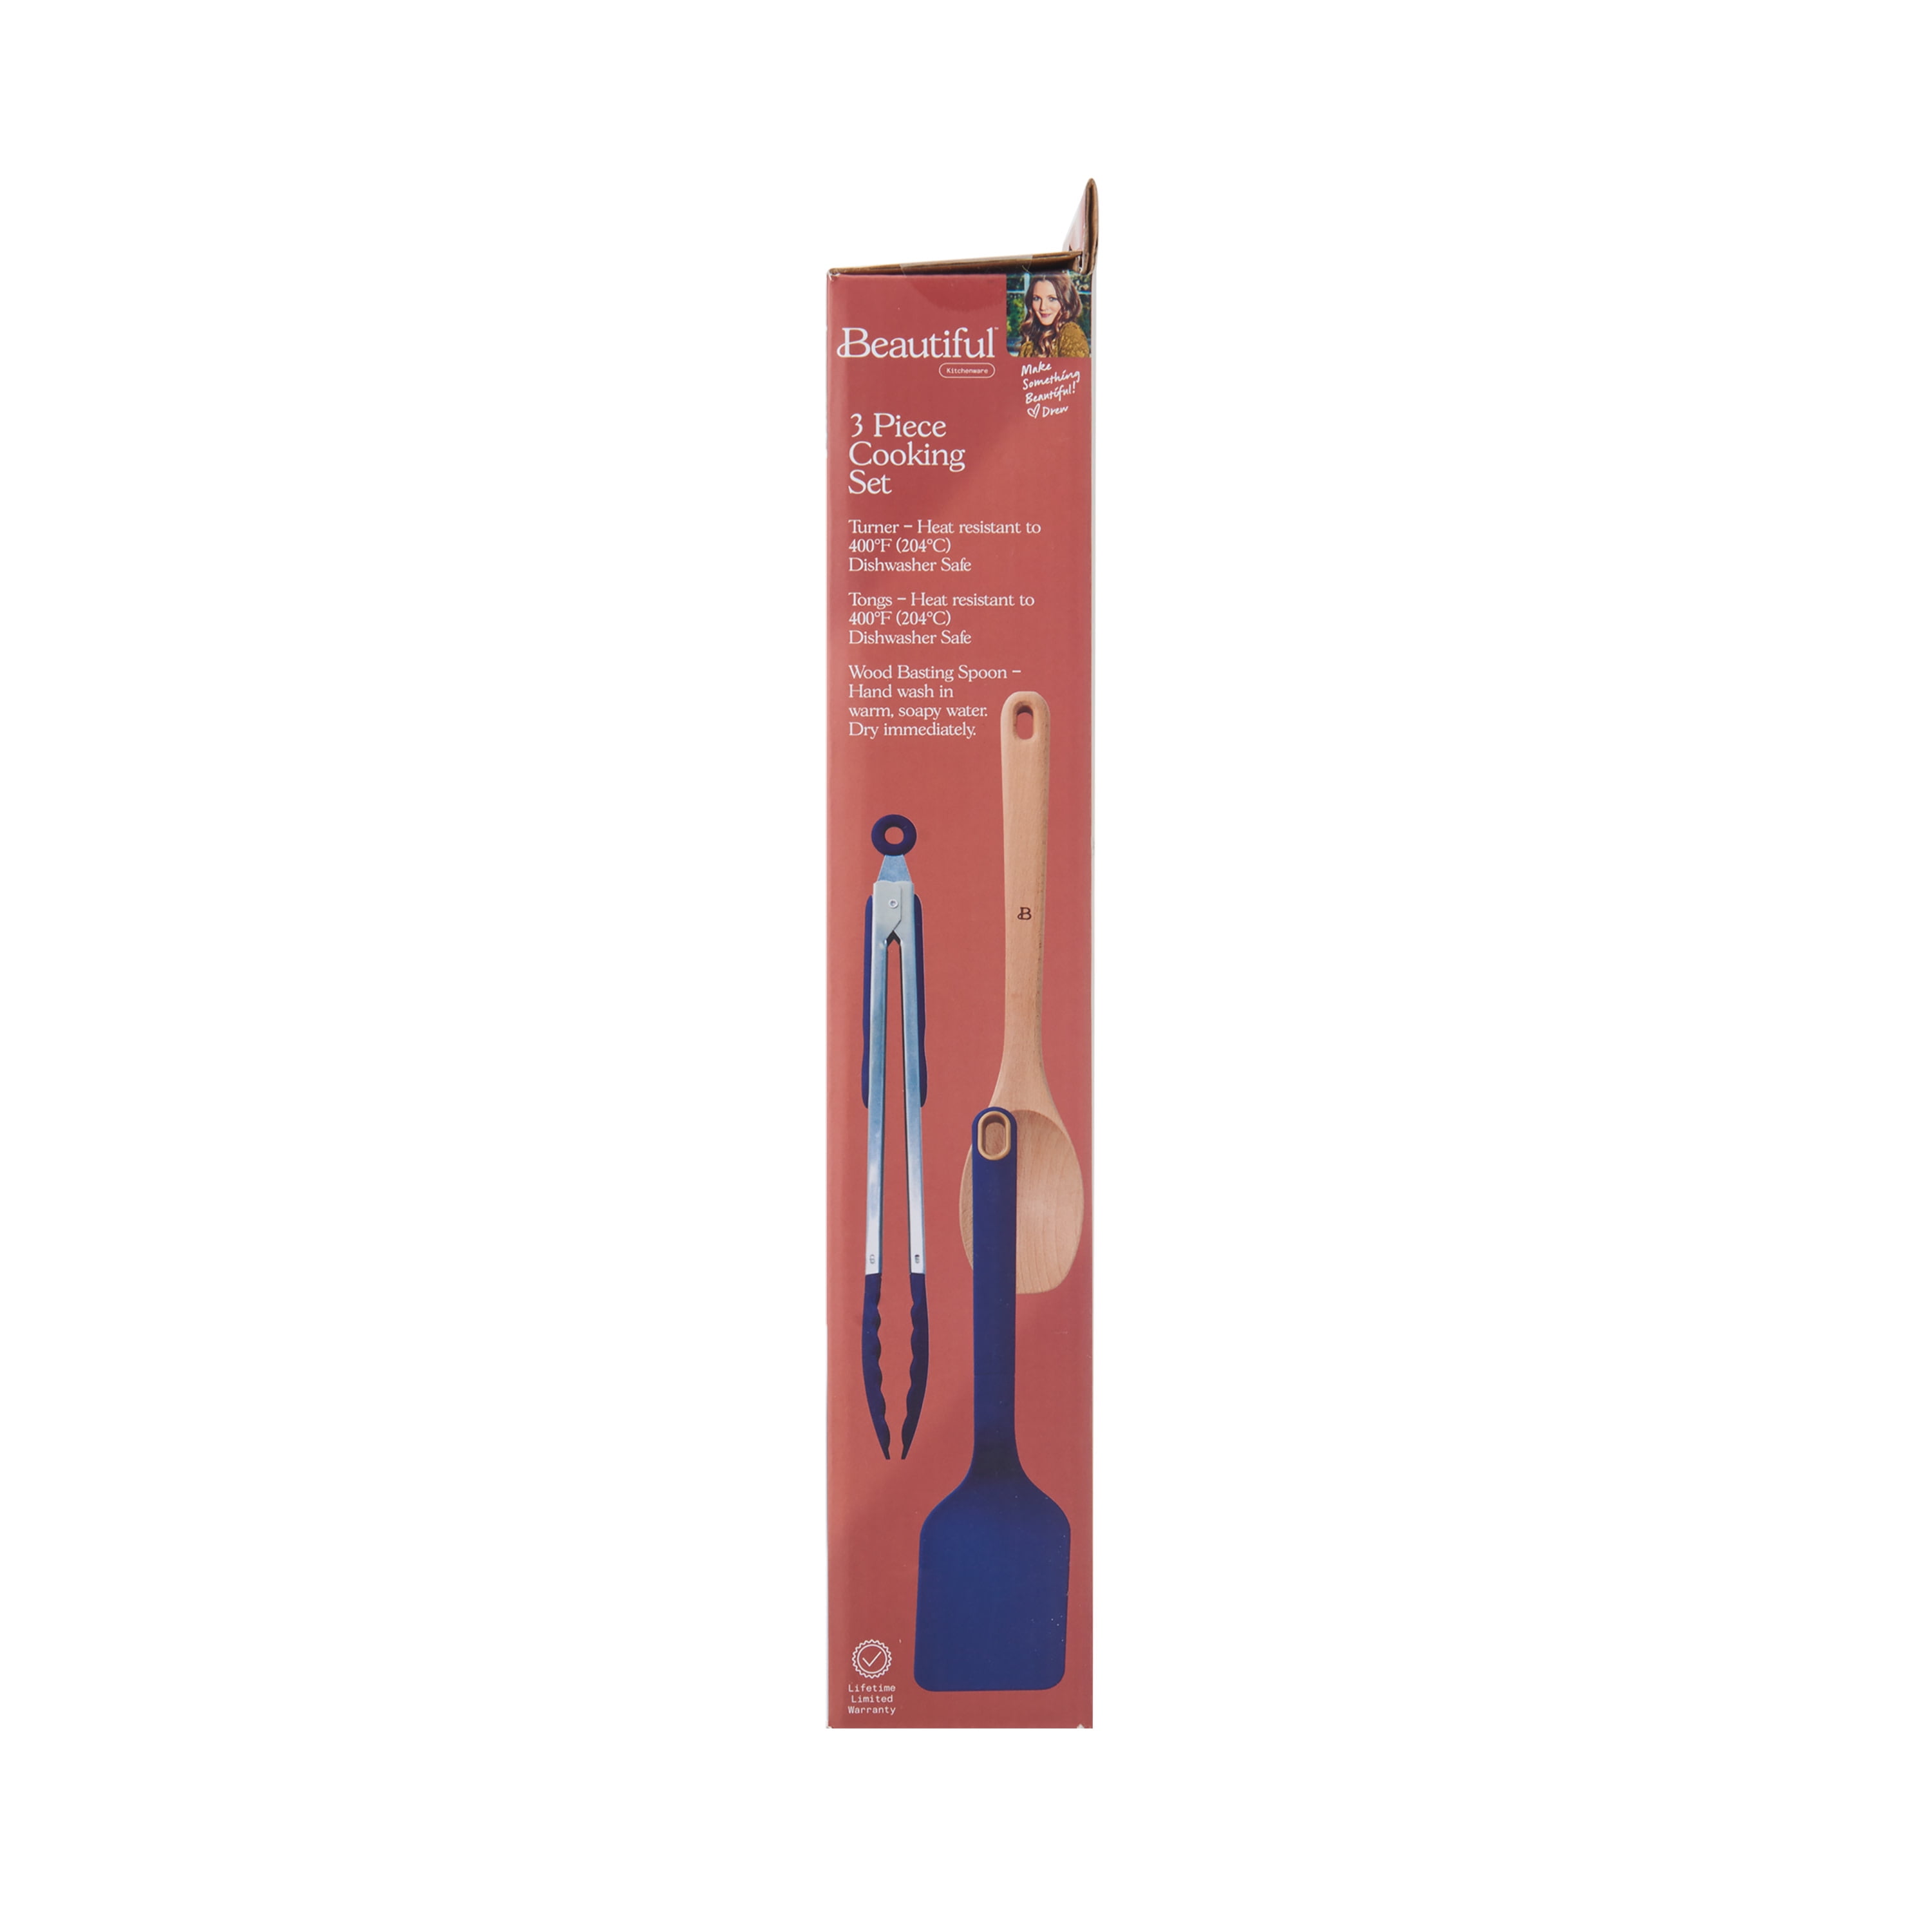 Beautiful 5-Piece Cooking Set in Blueberry by Drew Barrymore